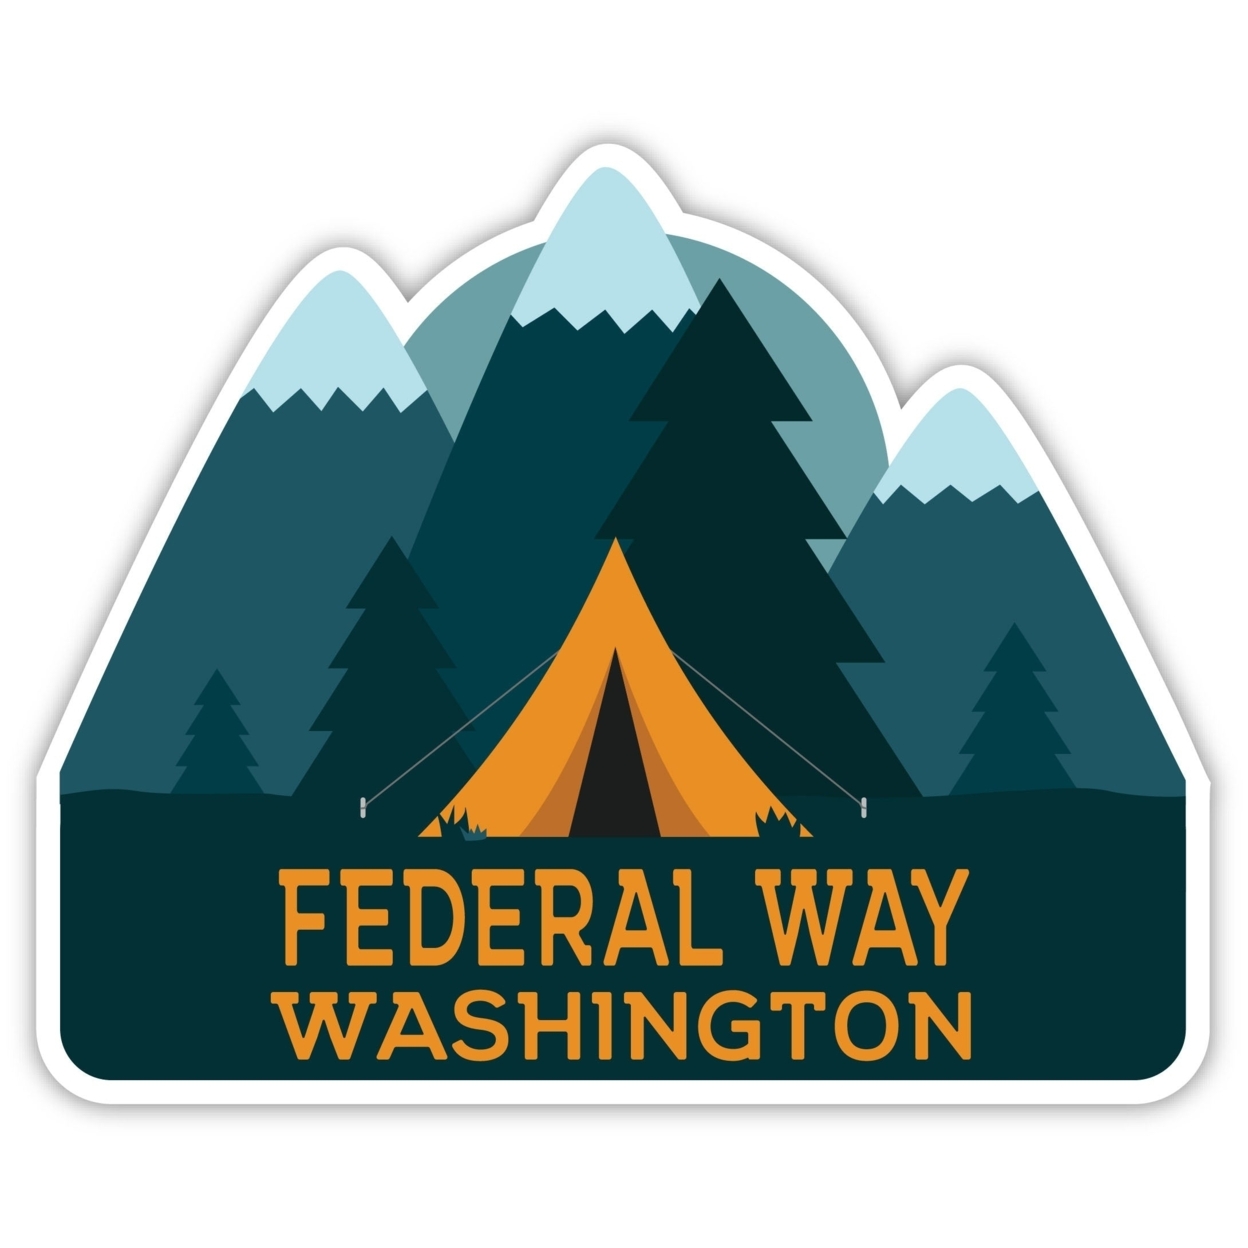 Federal Way Washington Souvenir Decorative Stickers (Choose Theme And Size) - 4-Pack, 2-Inch, Tent